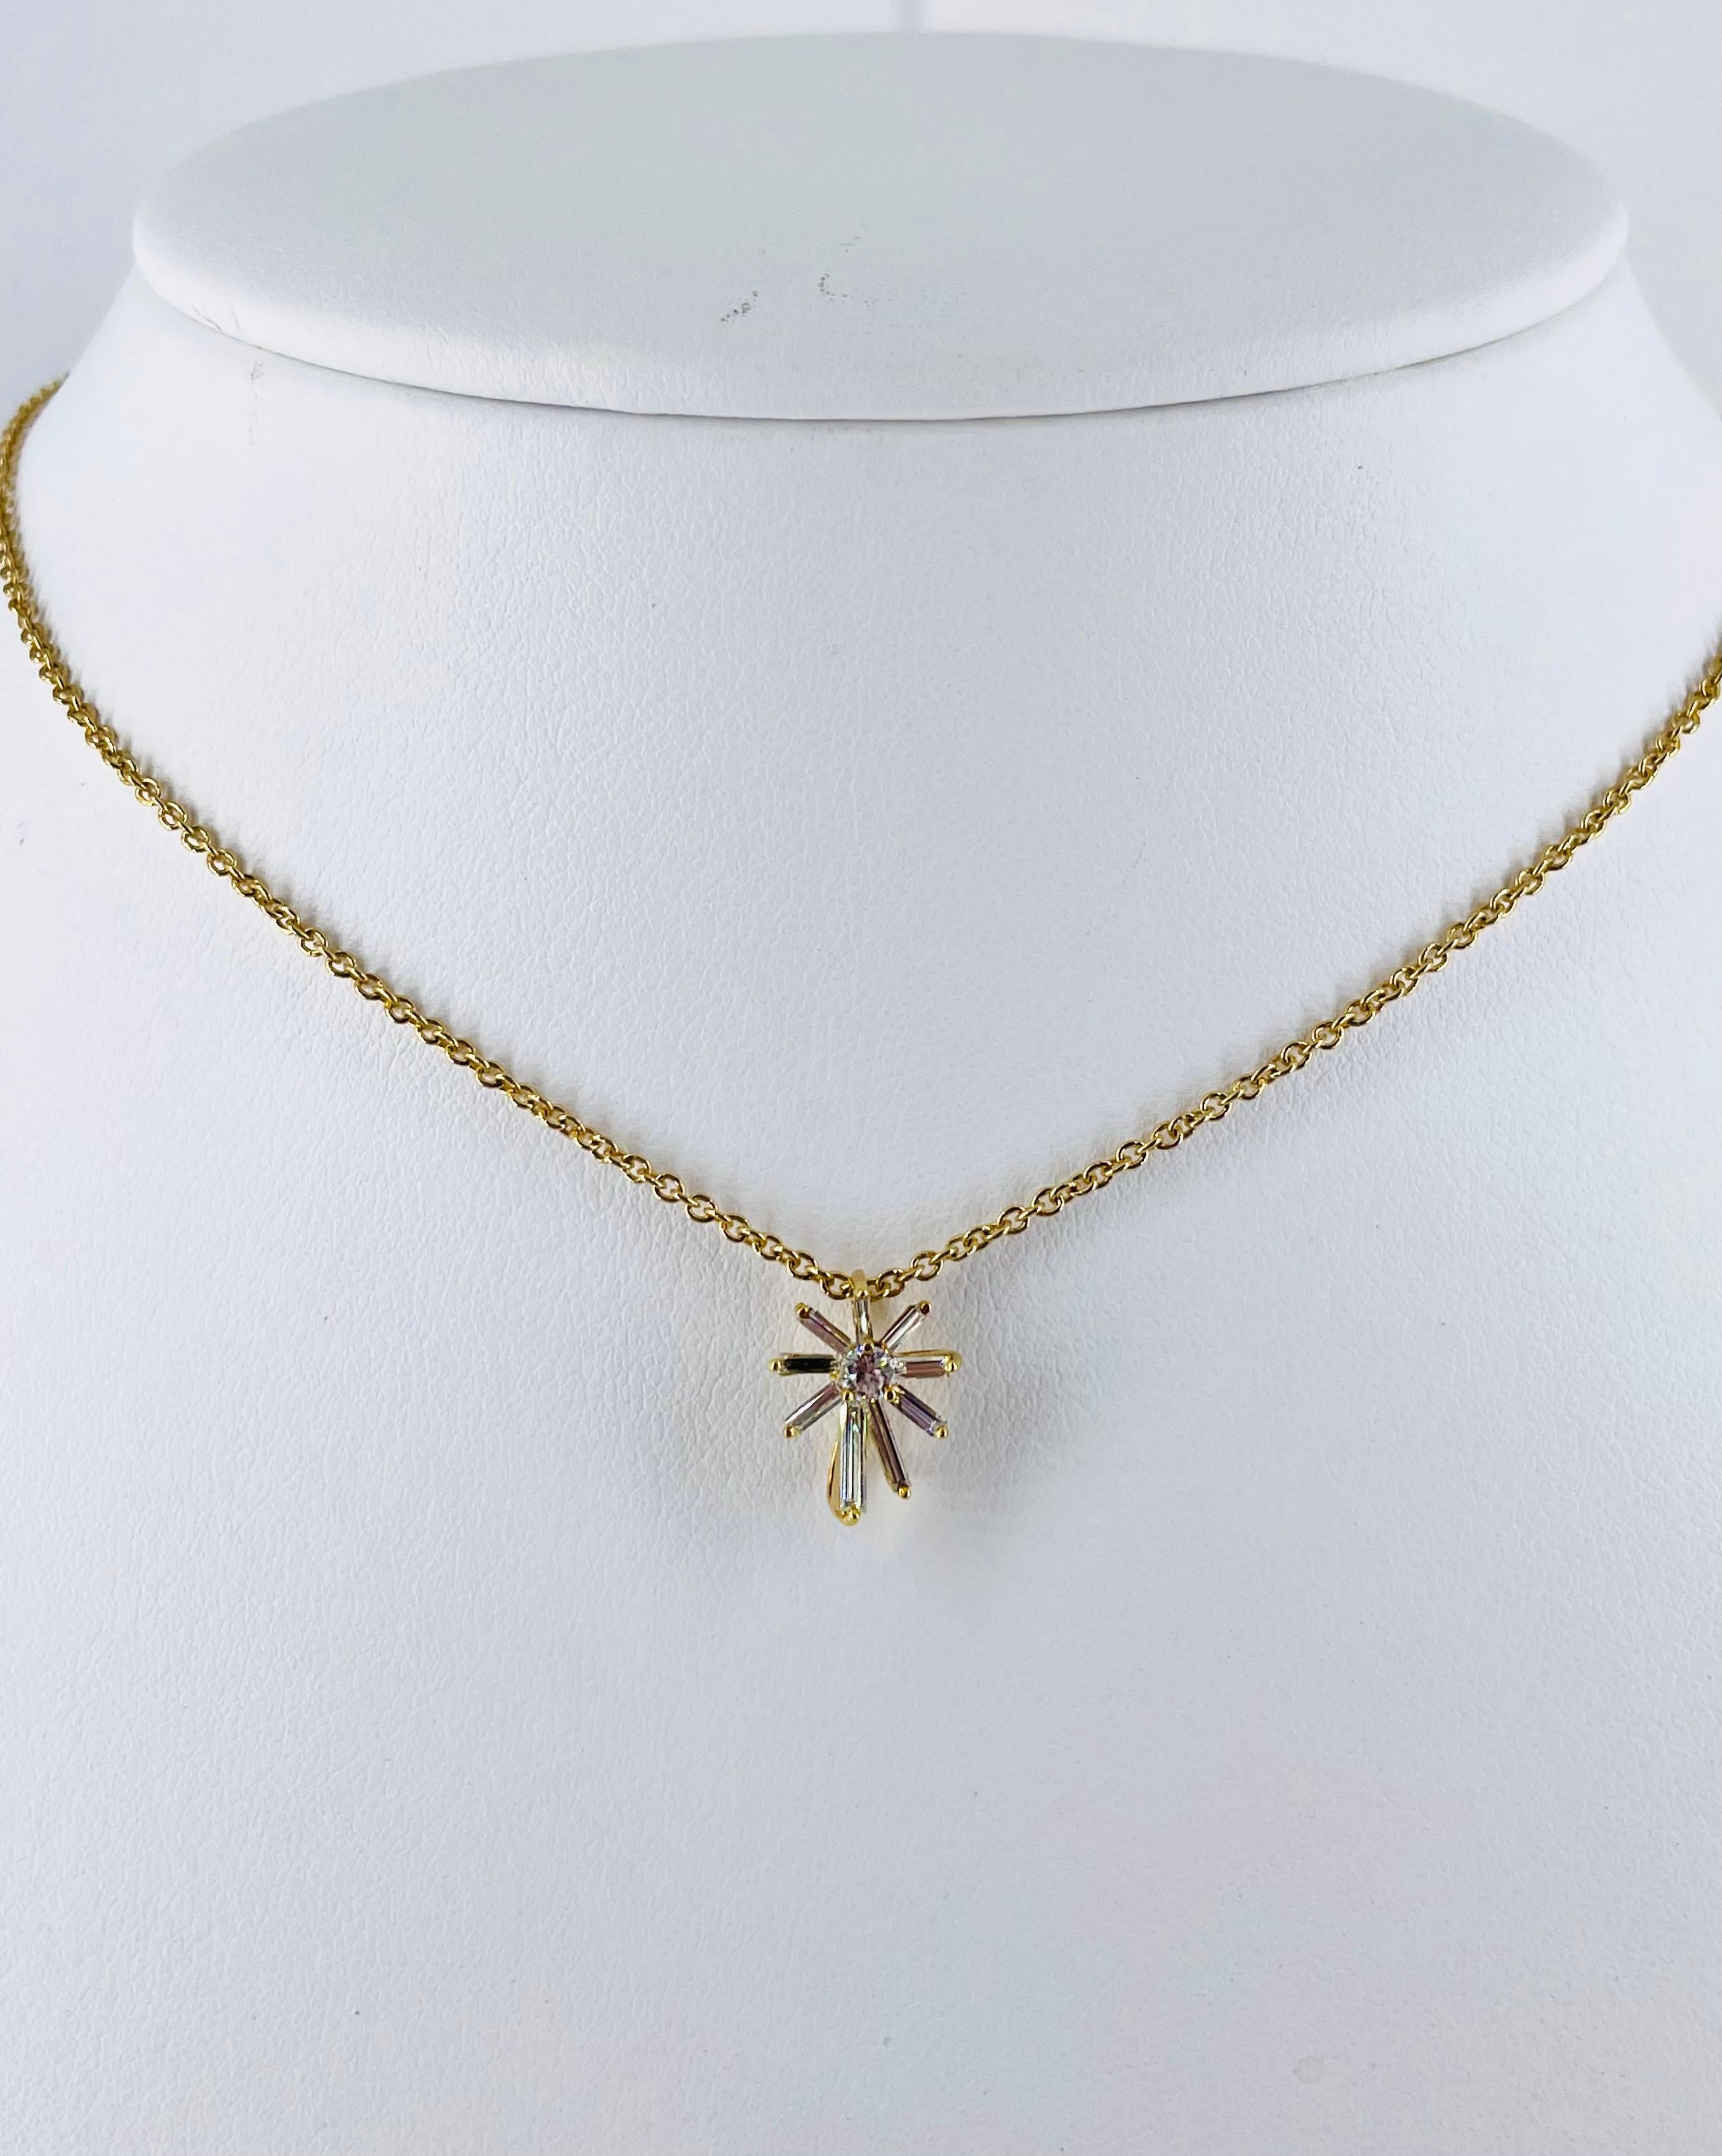 This charming and unique piece by Kurt Wayne features a 0.10ct round diamond and nine straight baguettes that form a graceful asymmetrical starburst design. The setting and chain are crafted in 14K yellow gold, and the chain is 16 inches long.